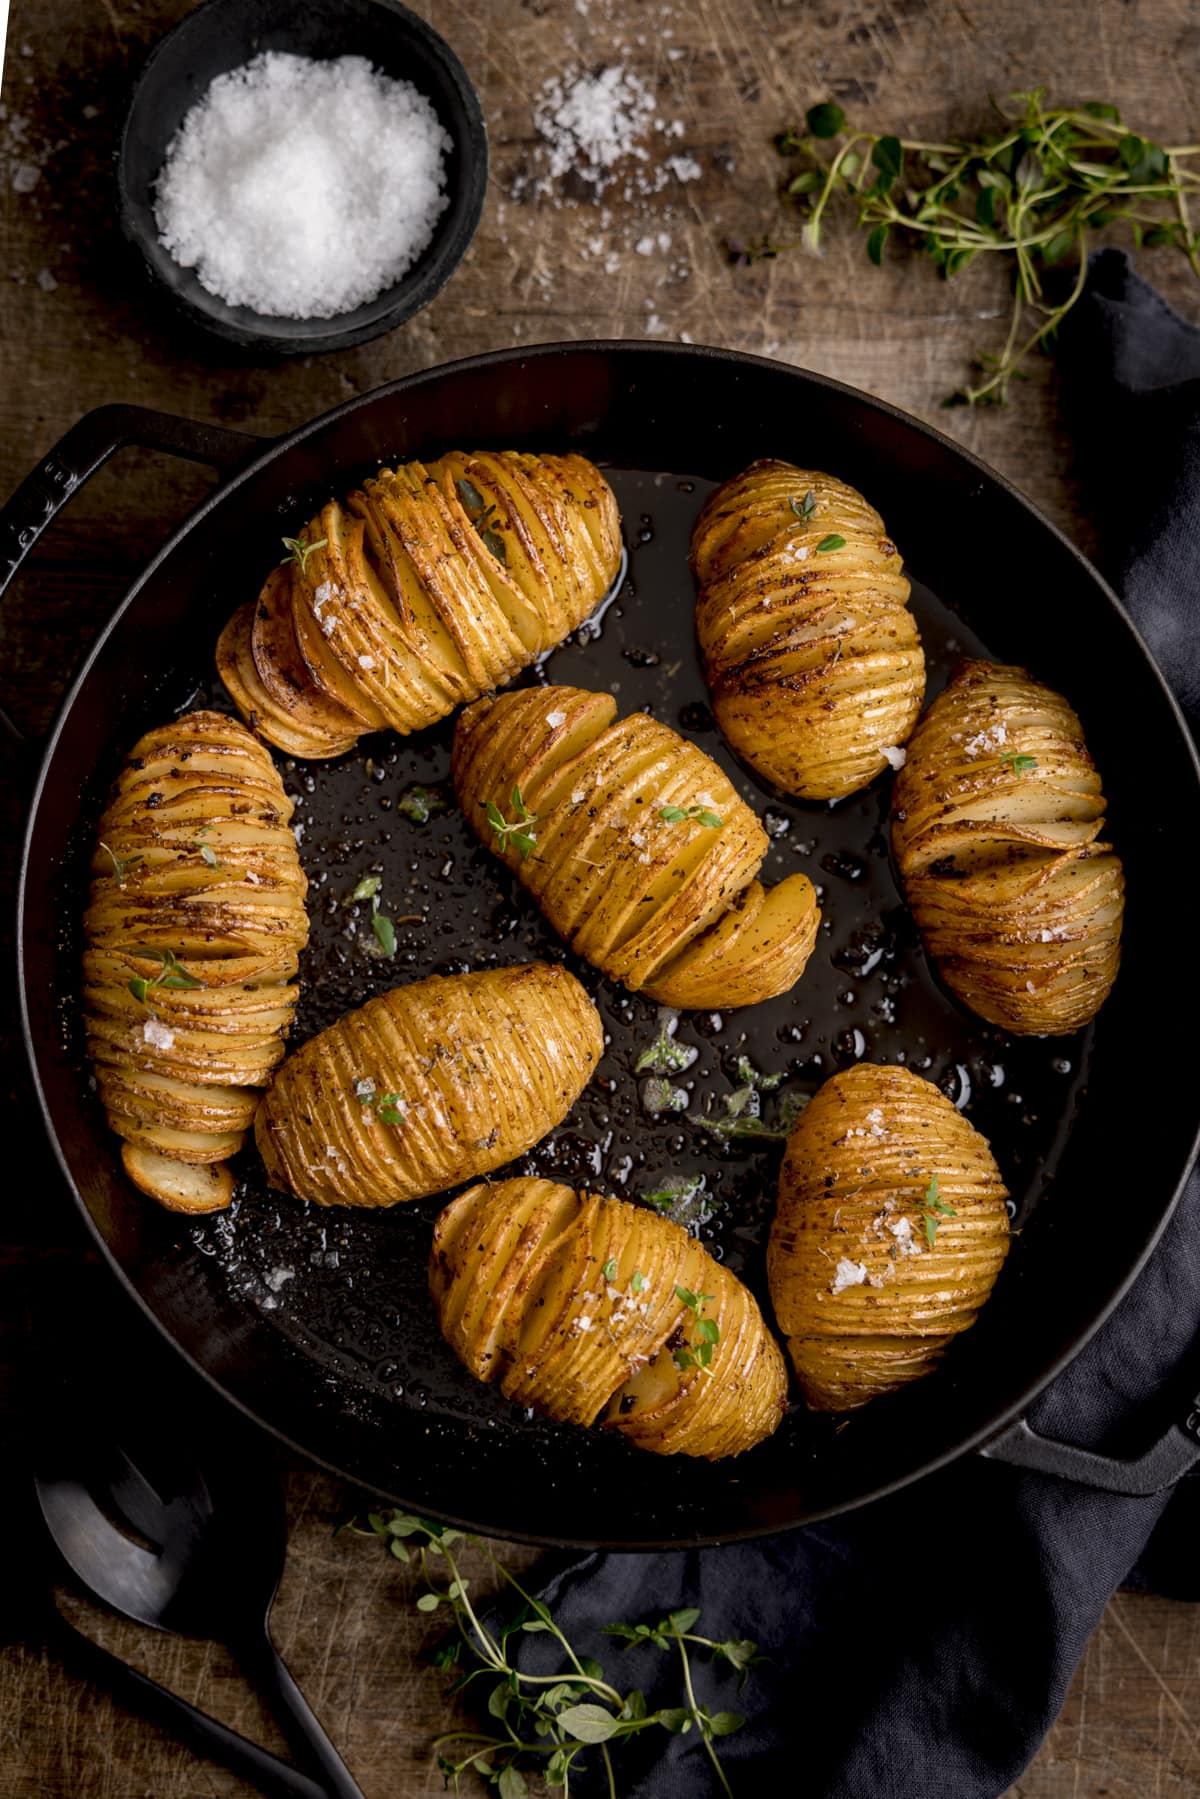 Overhead image of hasselback potatoes in a dark cast iron pan, topped with fresh thyme leaves and Maldon salt. The pan is on a wooden table and there is a small bowl of Maldon salt and some thyme leaves around the pan.